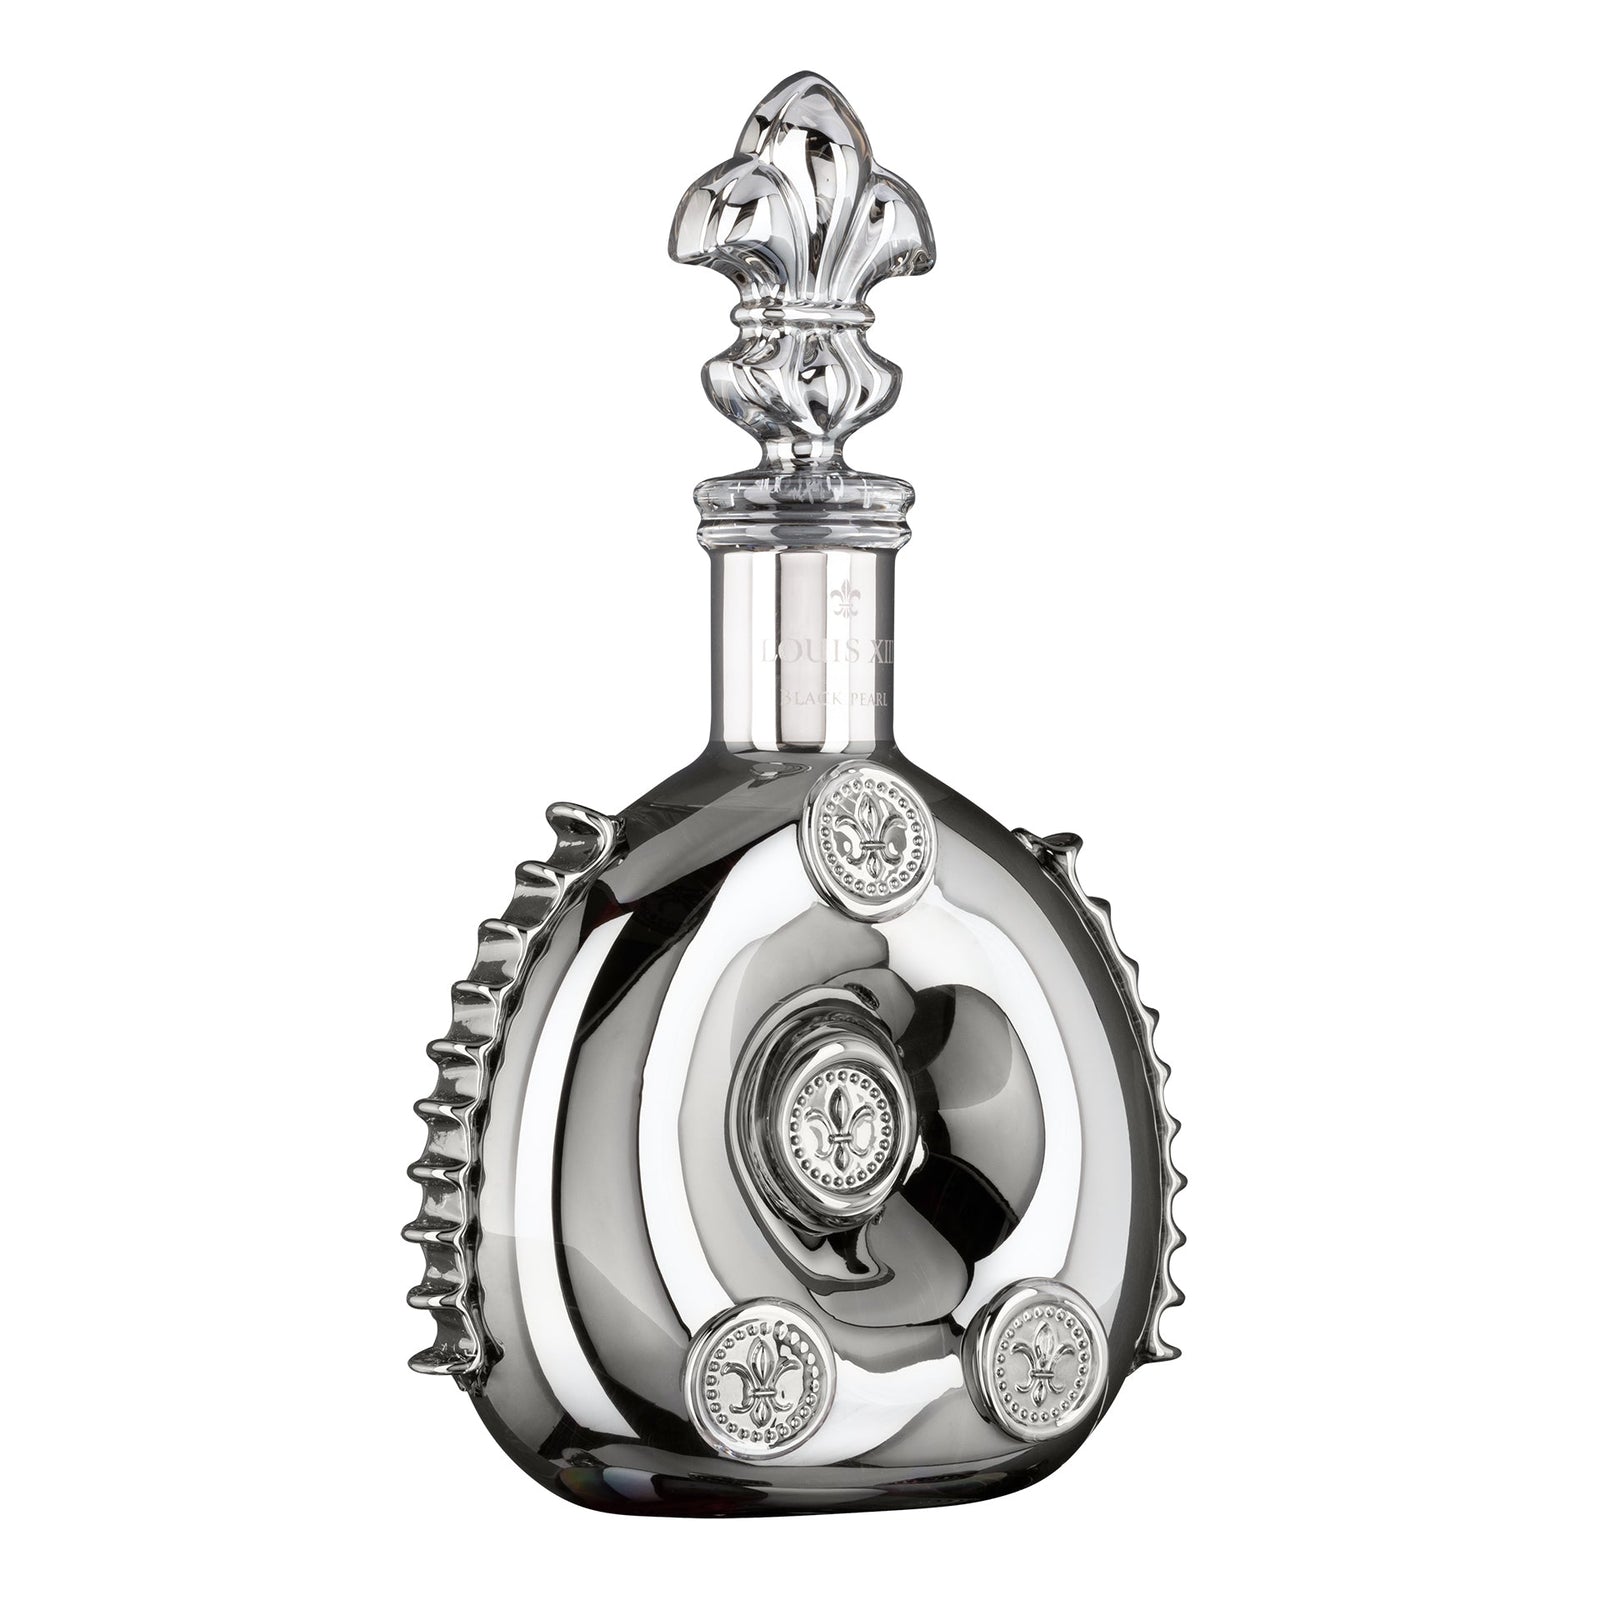 LOUIS XIII Black Pearl Anniversary Edition - Official Website